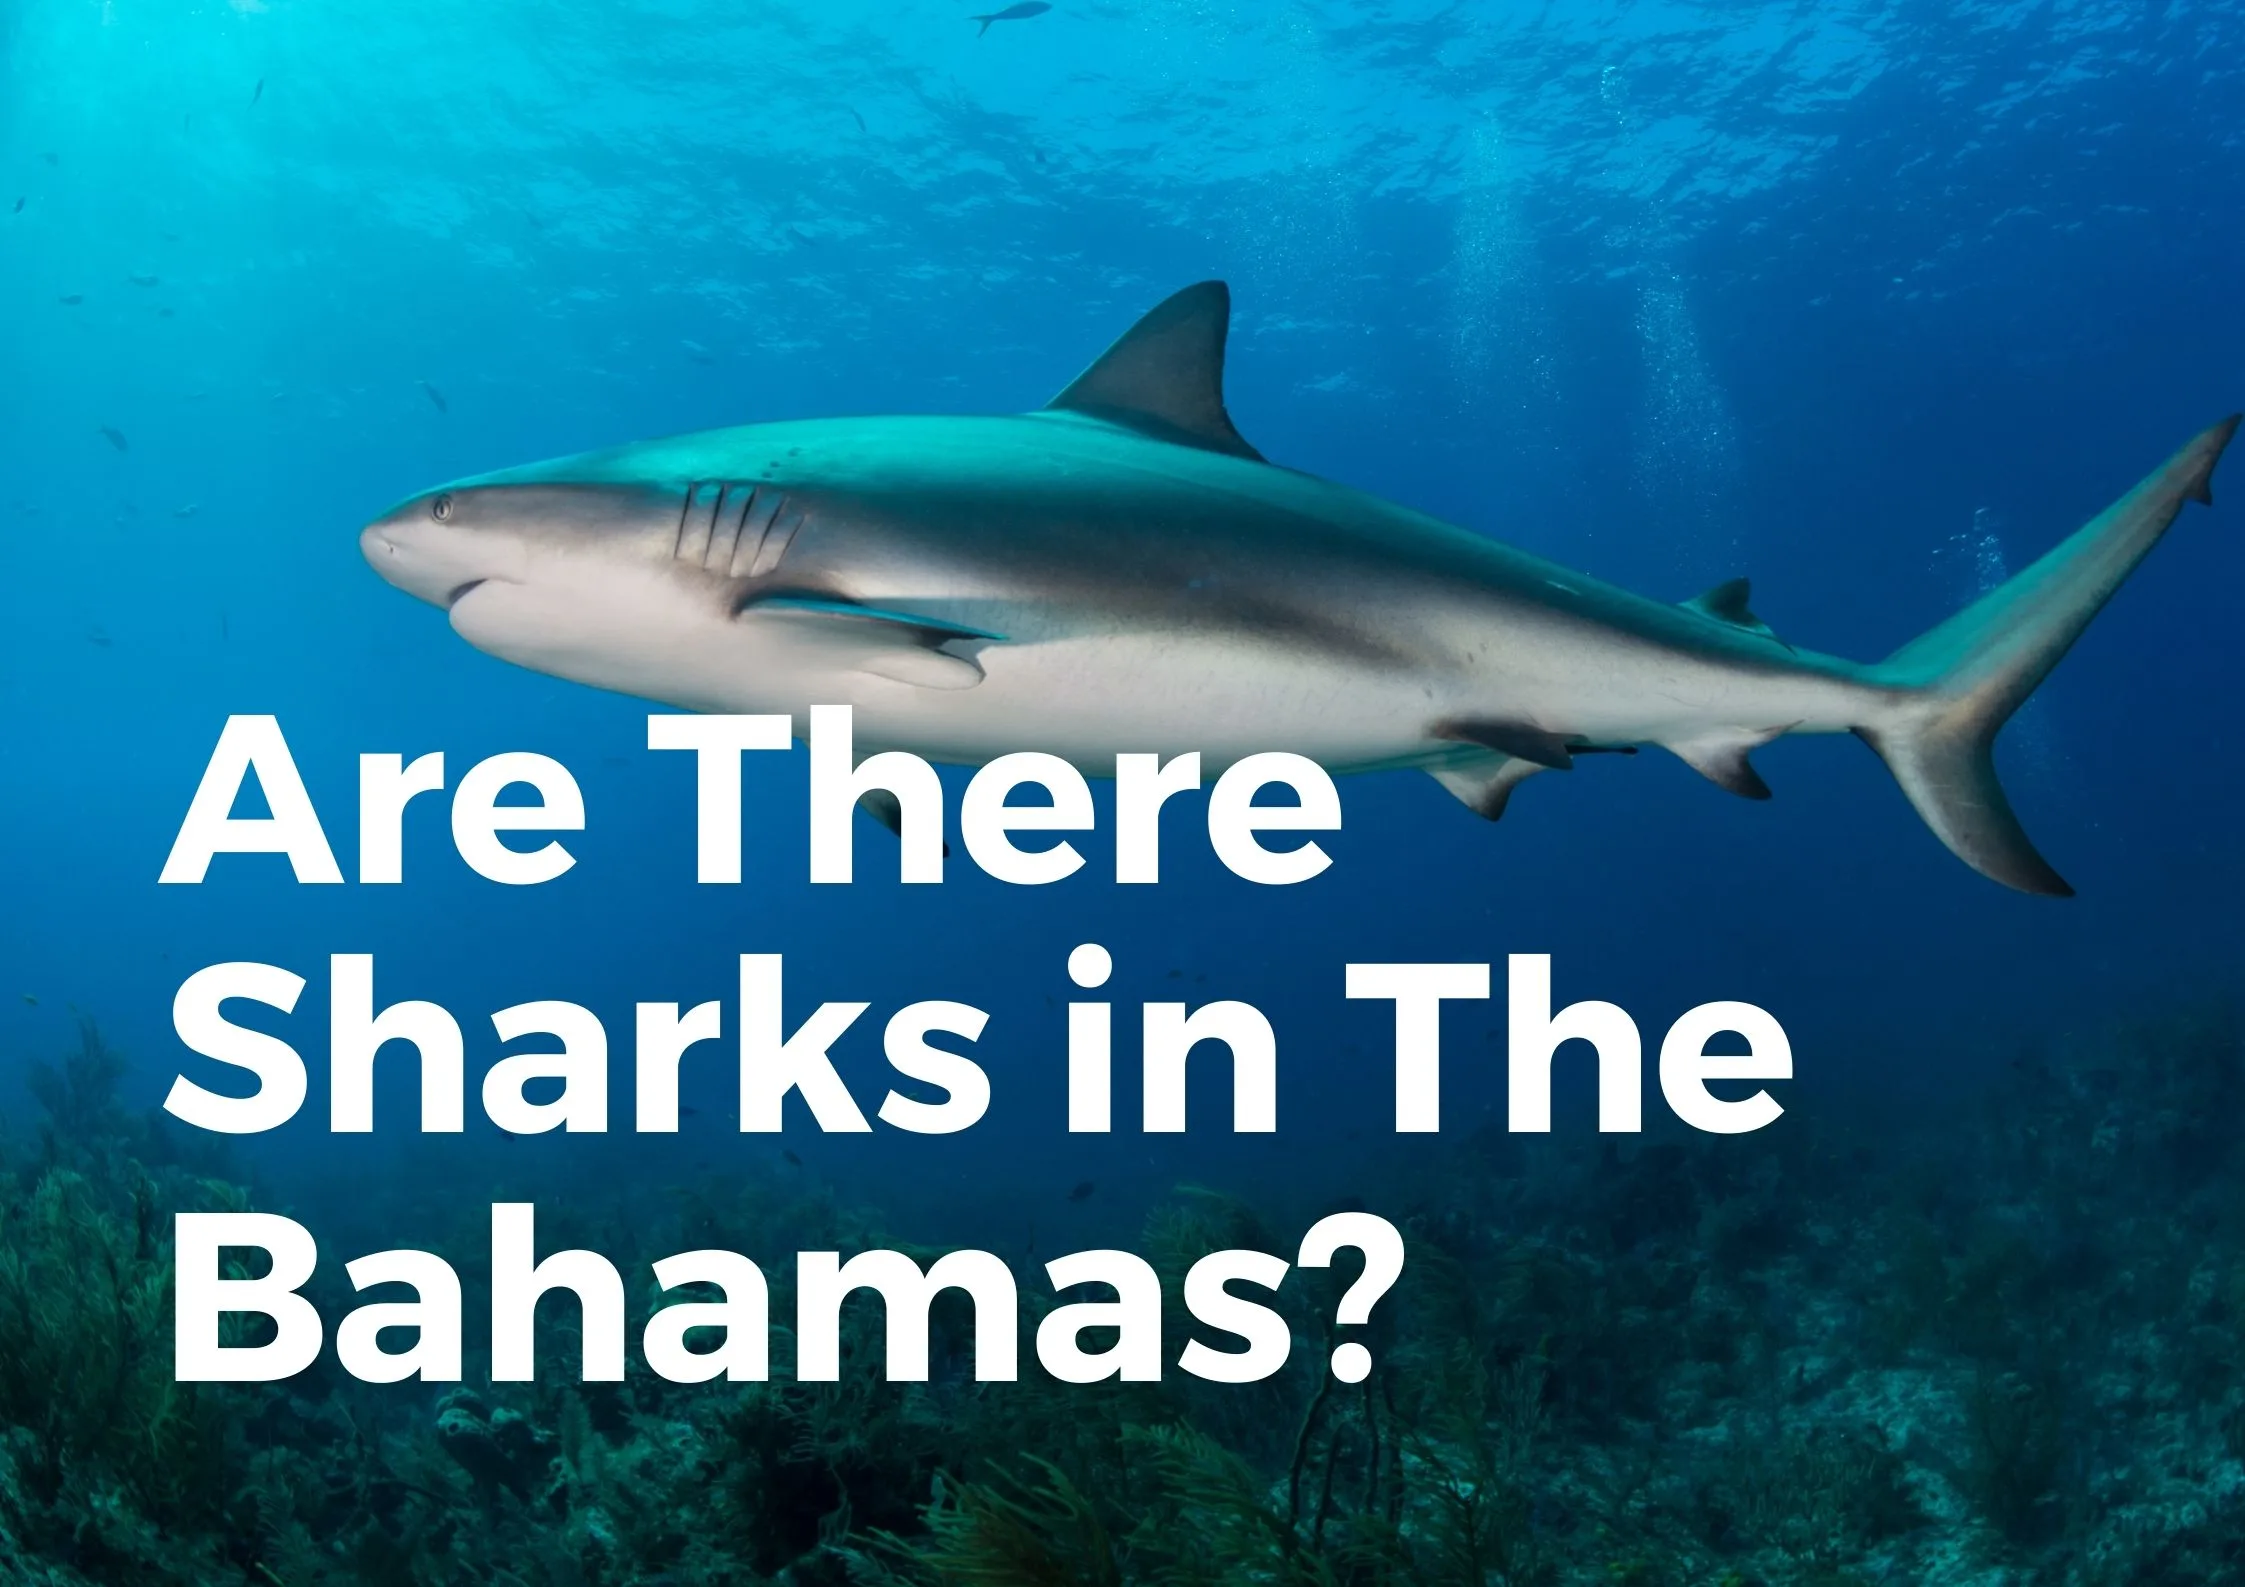 Are there sharks in the Bahamas?